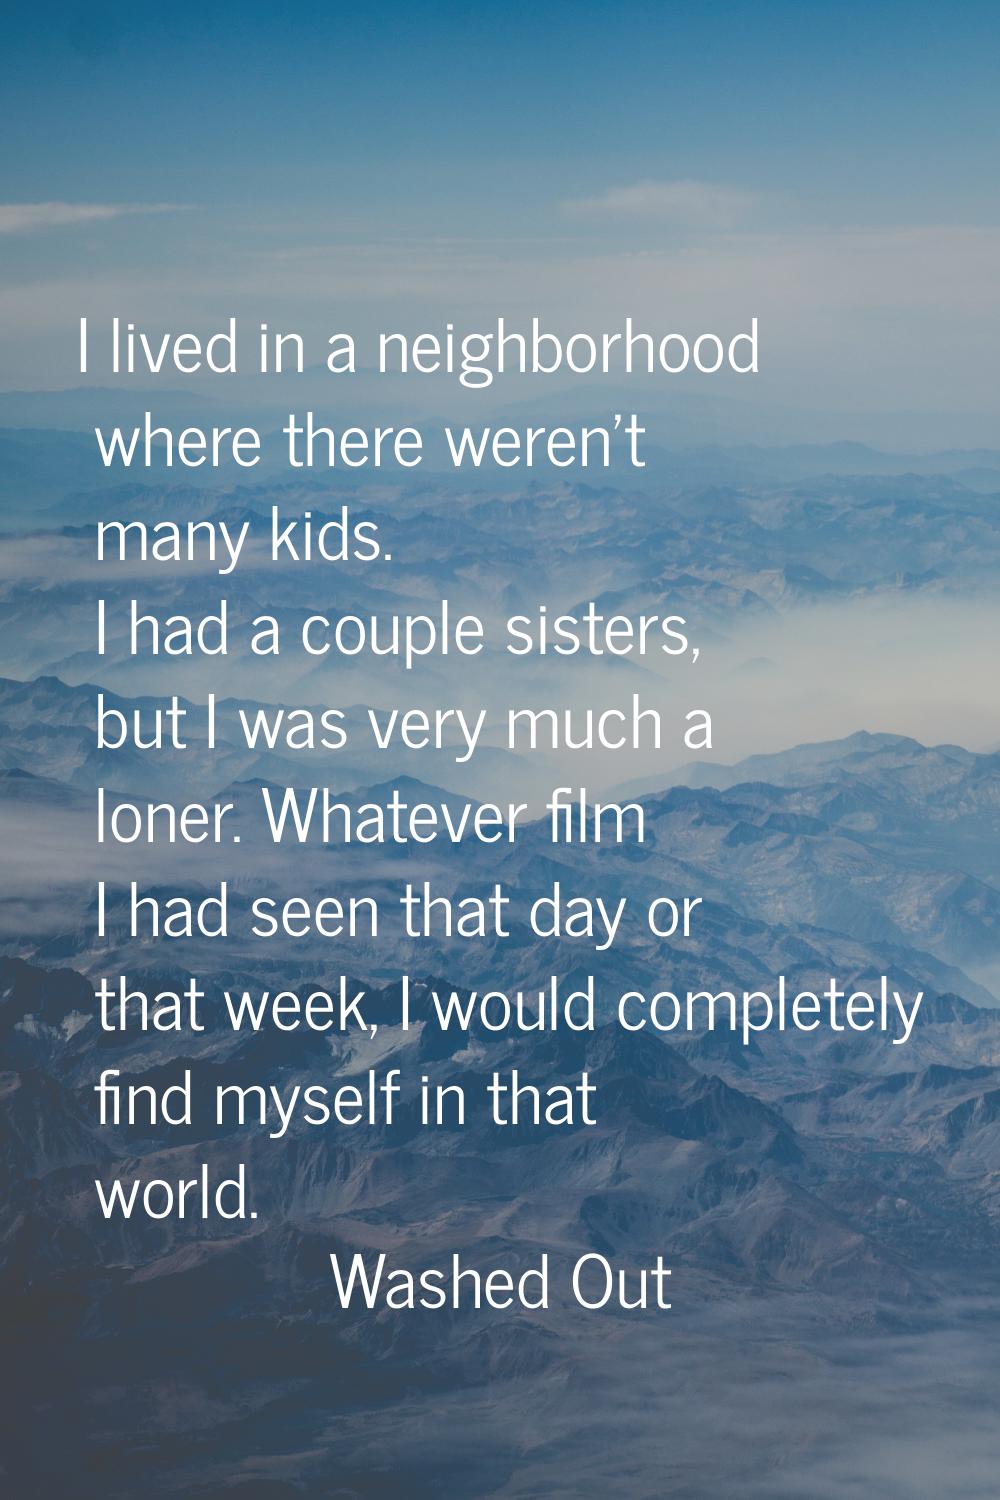 I lived in a neighborhood where there weren't many kids. I had a couple sisters, but I was very muc